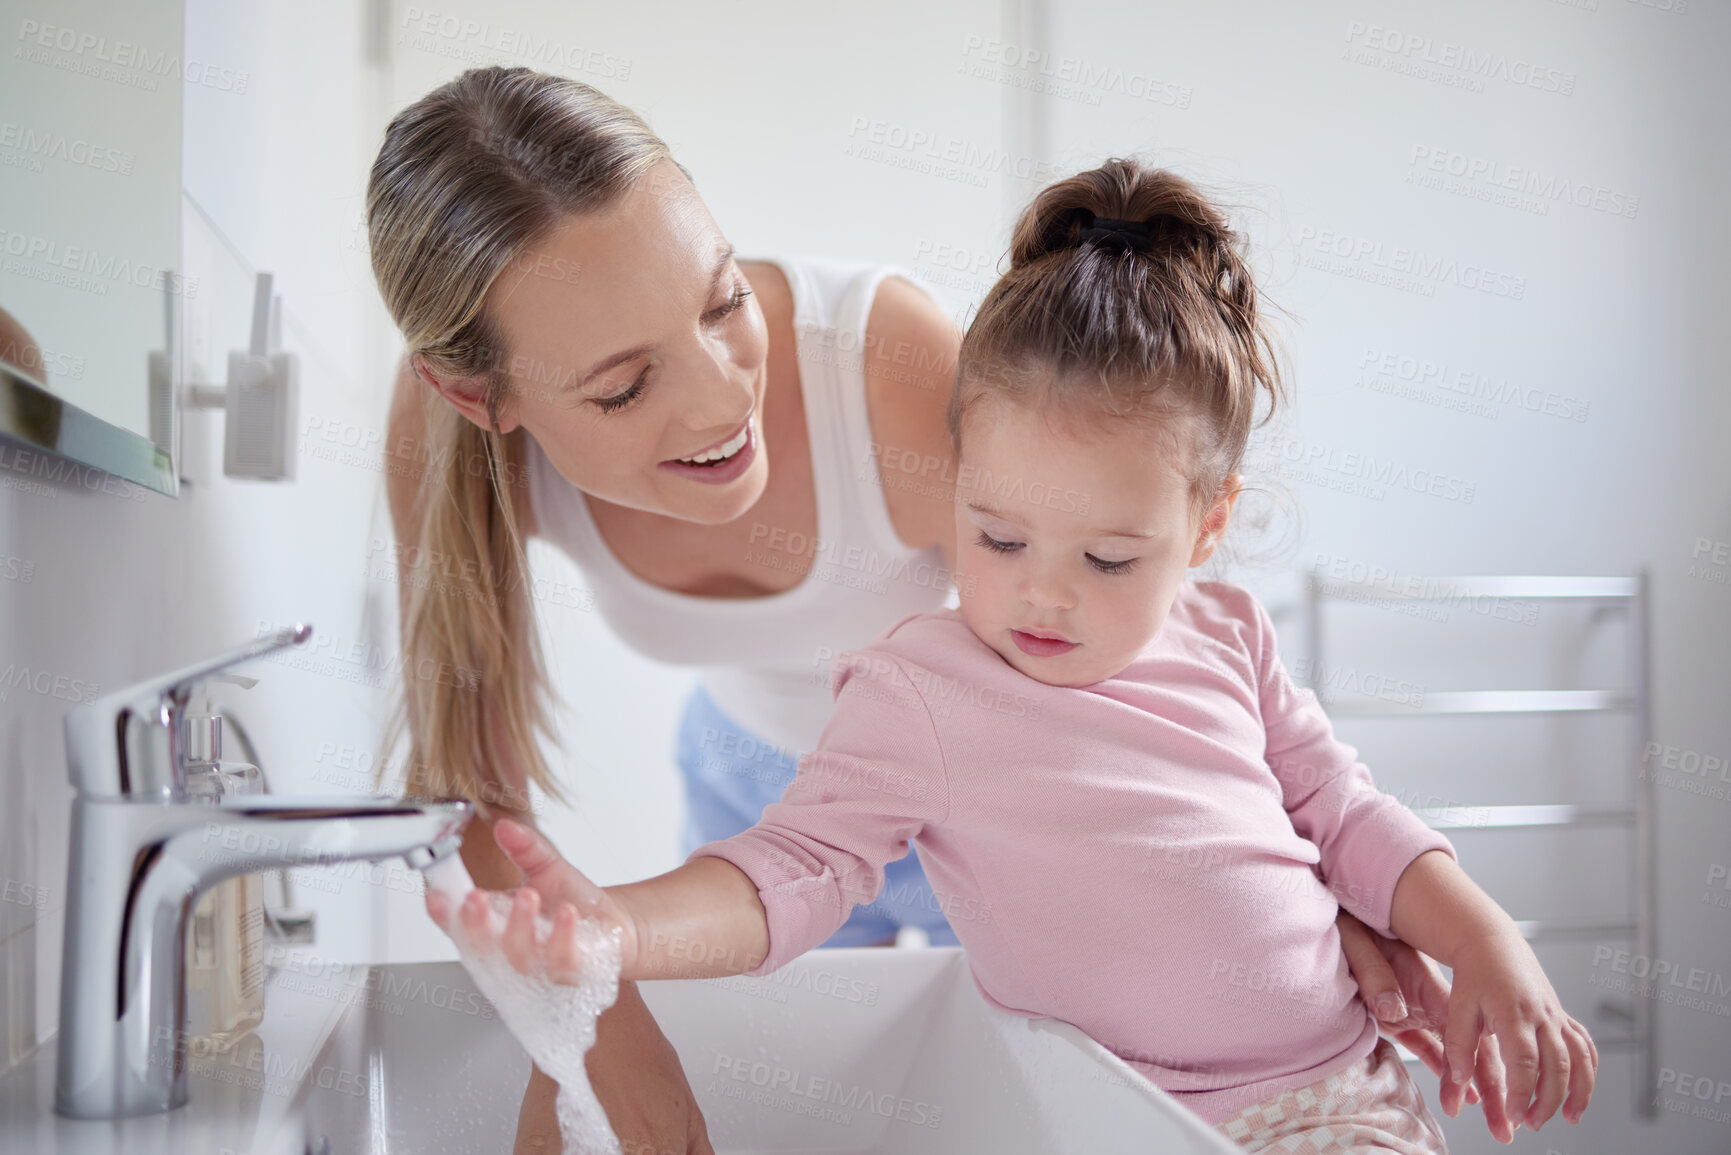 Buy stock photo Bathroom, clean and washing hands with child and mother teaching hygiene with running tap water in basin. Family, health and protection against virus with mom and baby learning a cleaning routine 